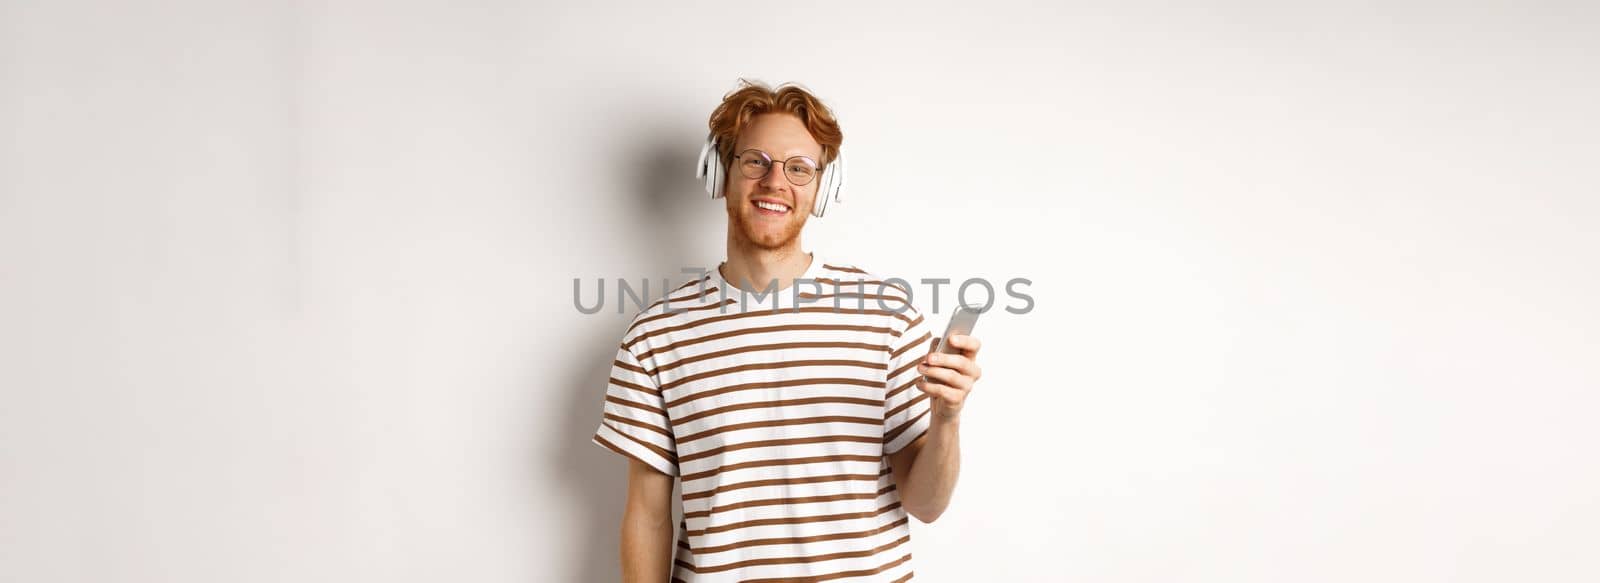 Technology concept. Young man with red hair and beard listening music in headphones and using smartphone, smiling at camera, white background.